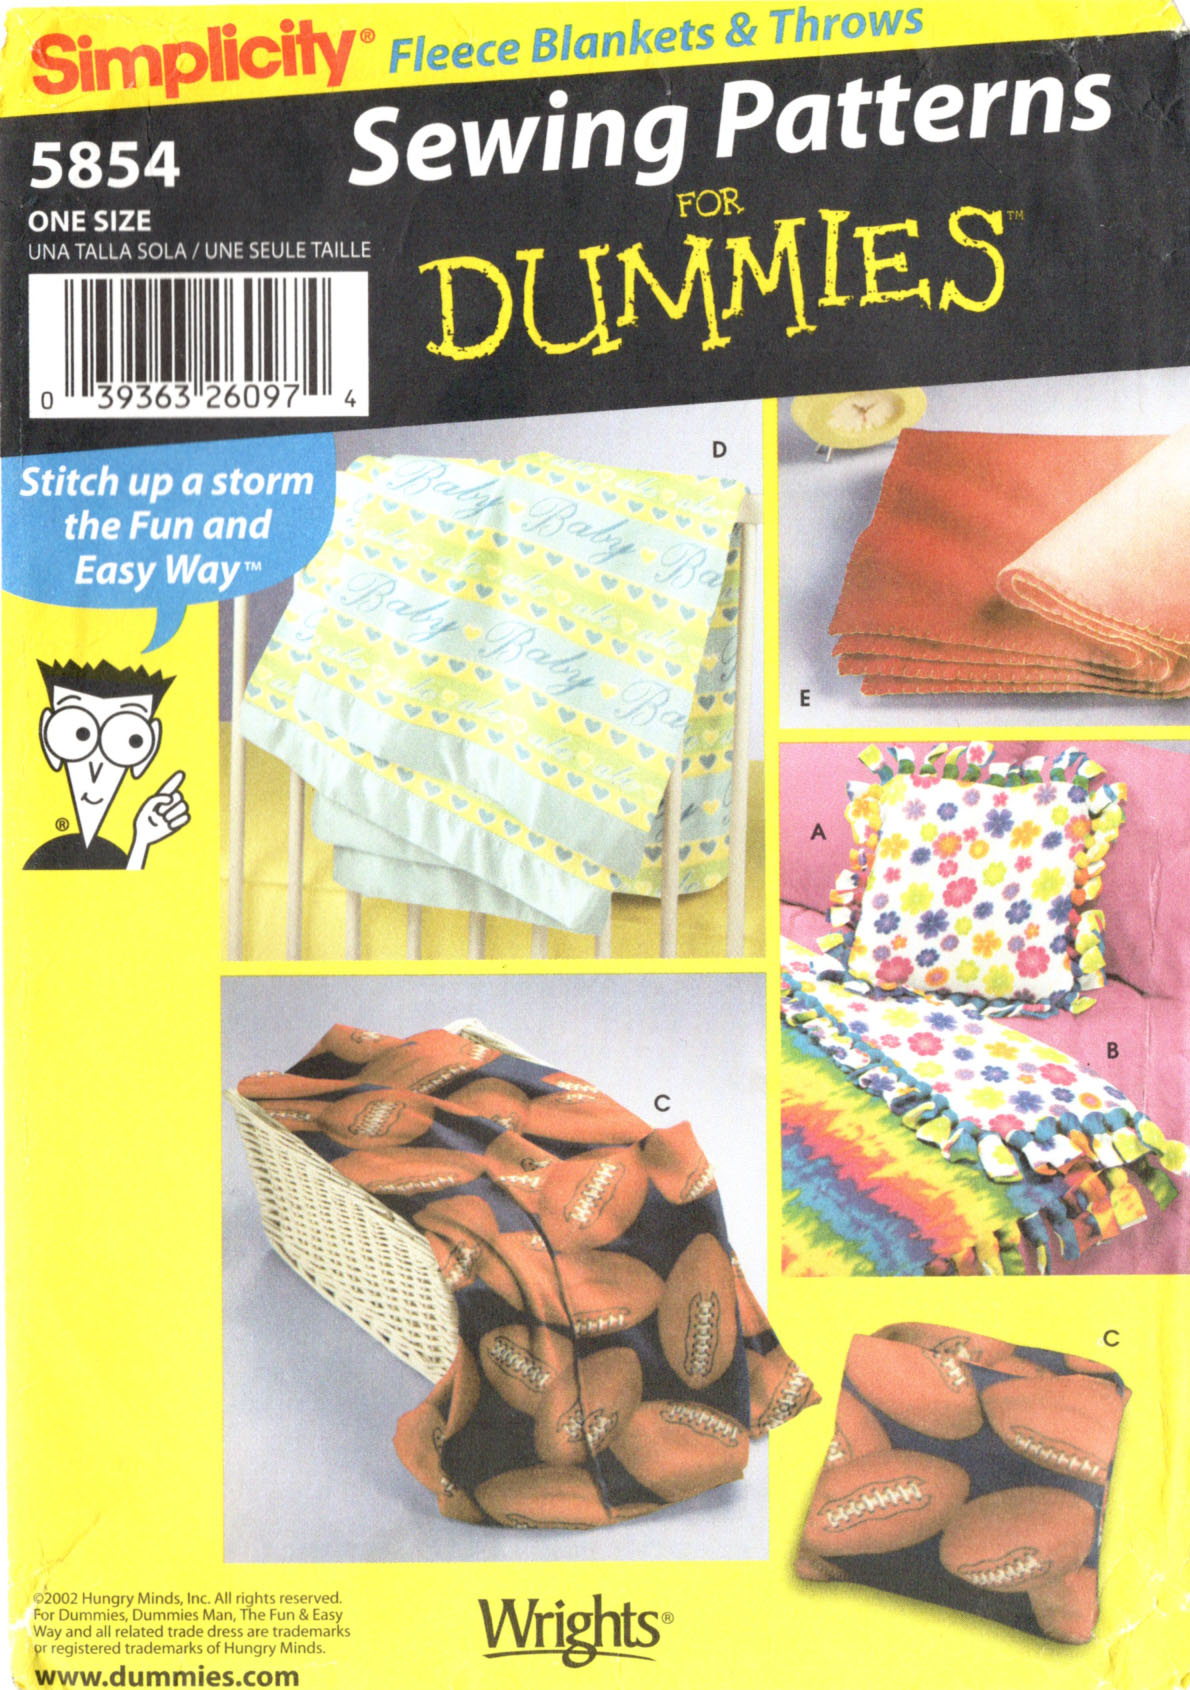 FLEECE BLANKETS & THROWS - Simplicity 5854 Sewing for Dummies